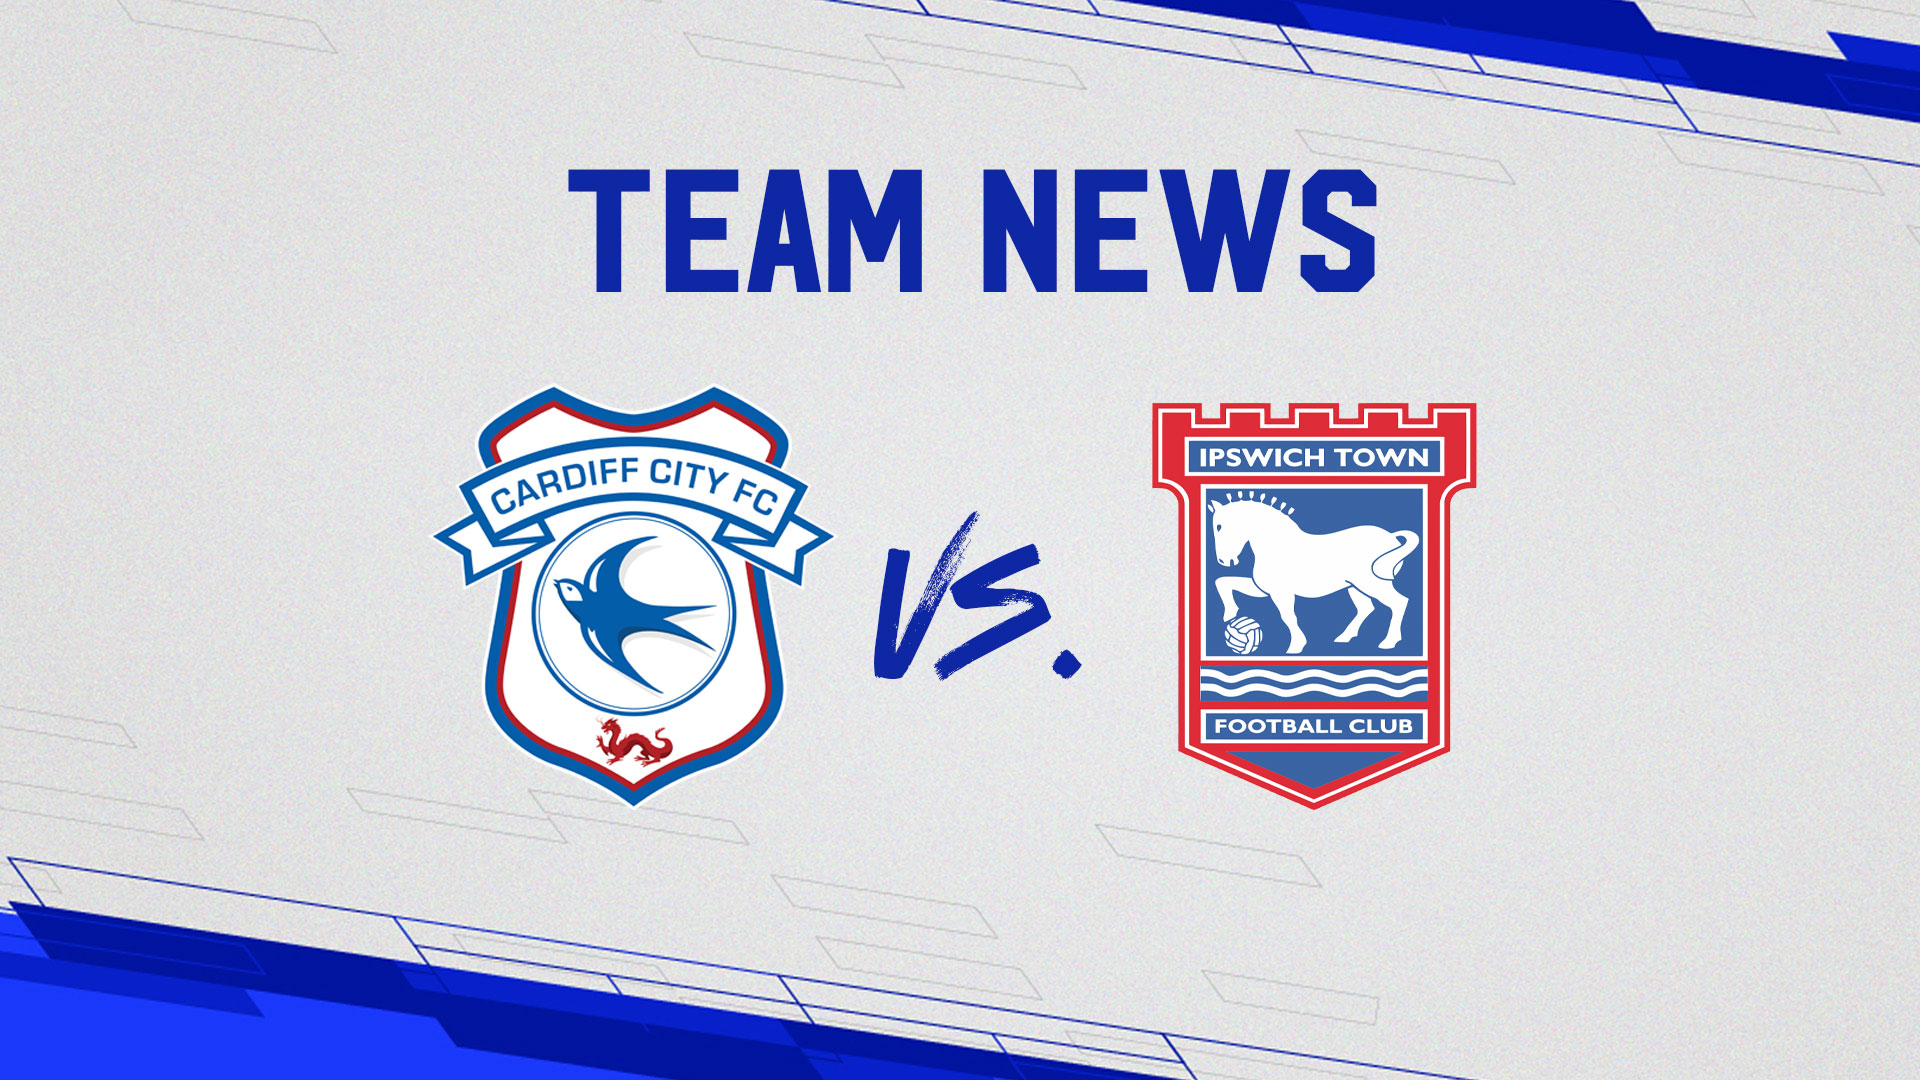 Match Preview: Cardiff City vs. Ipswich Town